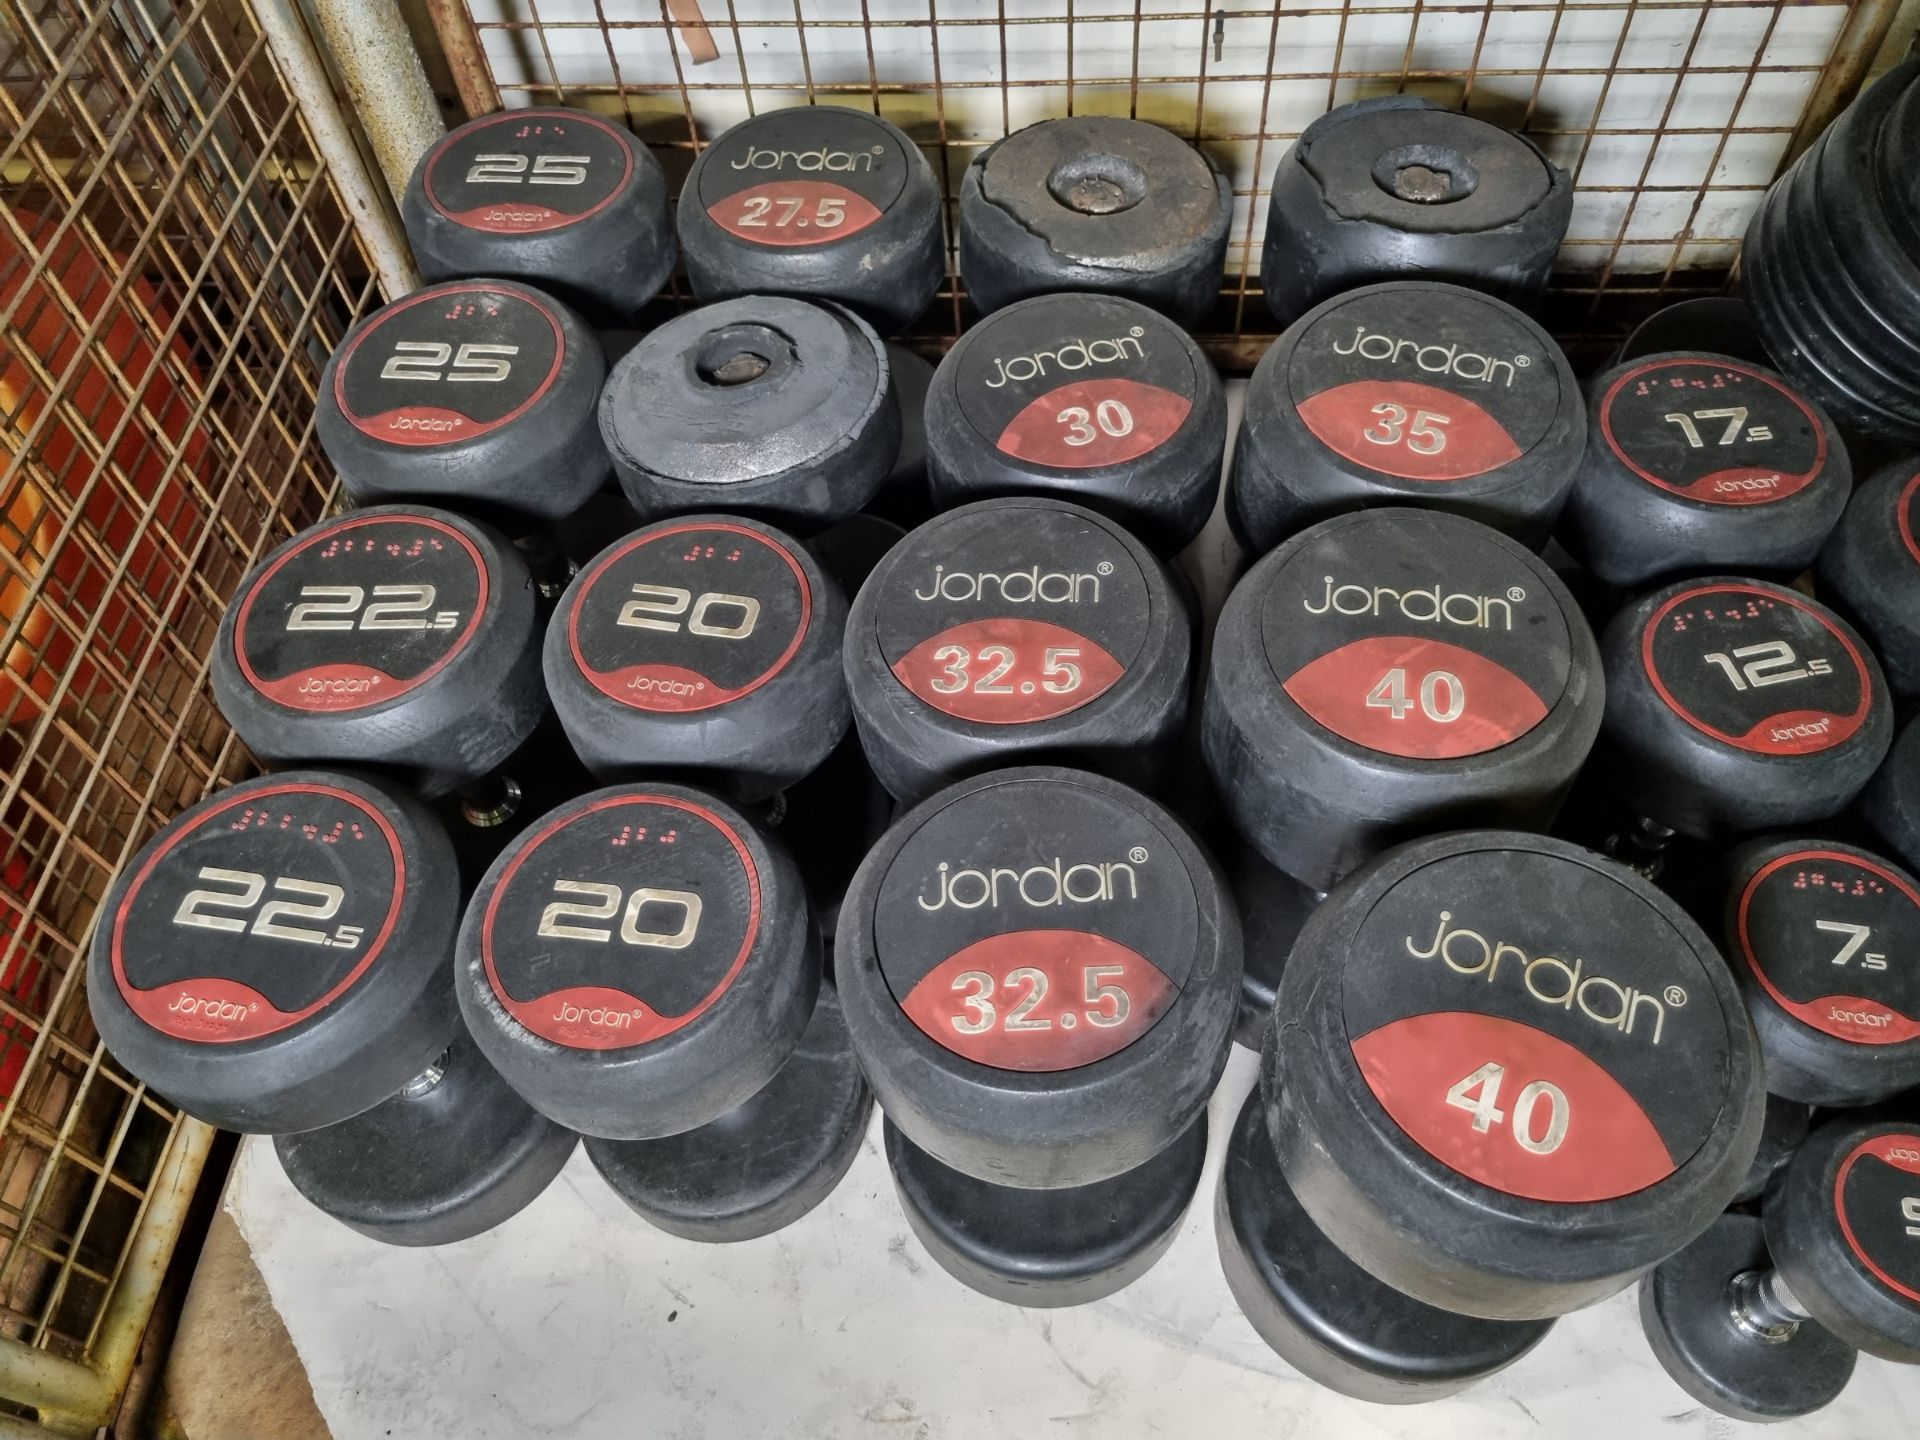 Jordan dumbbell weights ranging from 5Kg to 50Kg - some pairs incomplete - see pictures for weights - Image 4 of 4